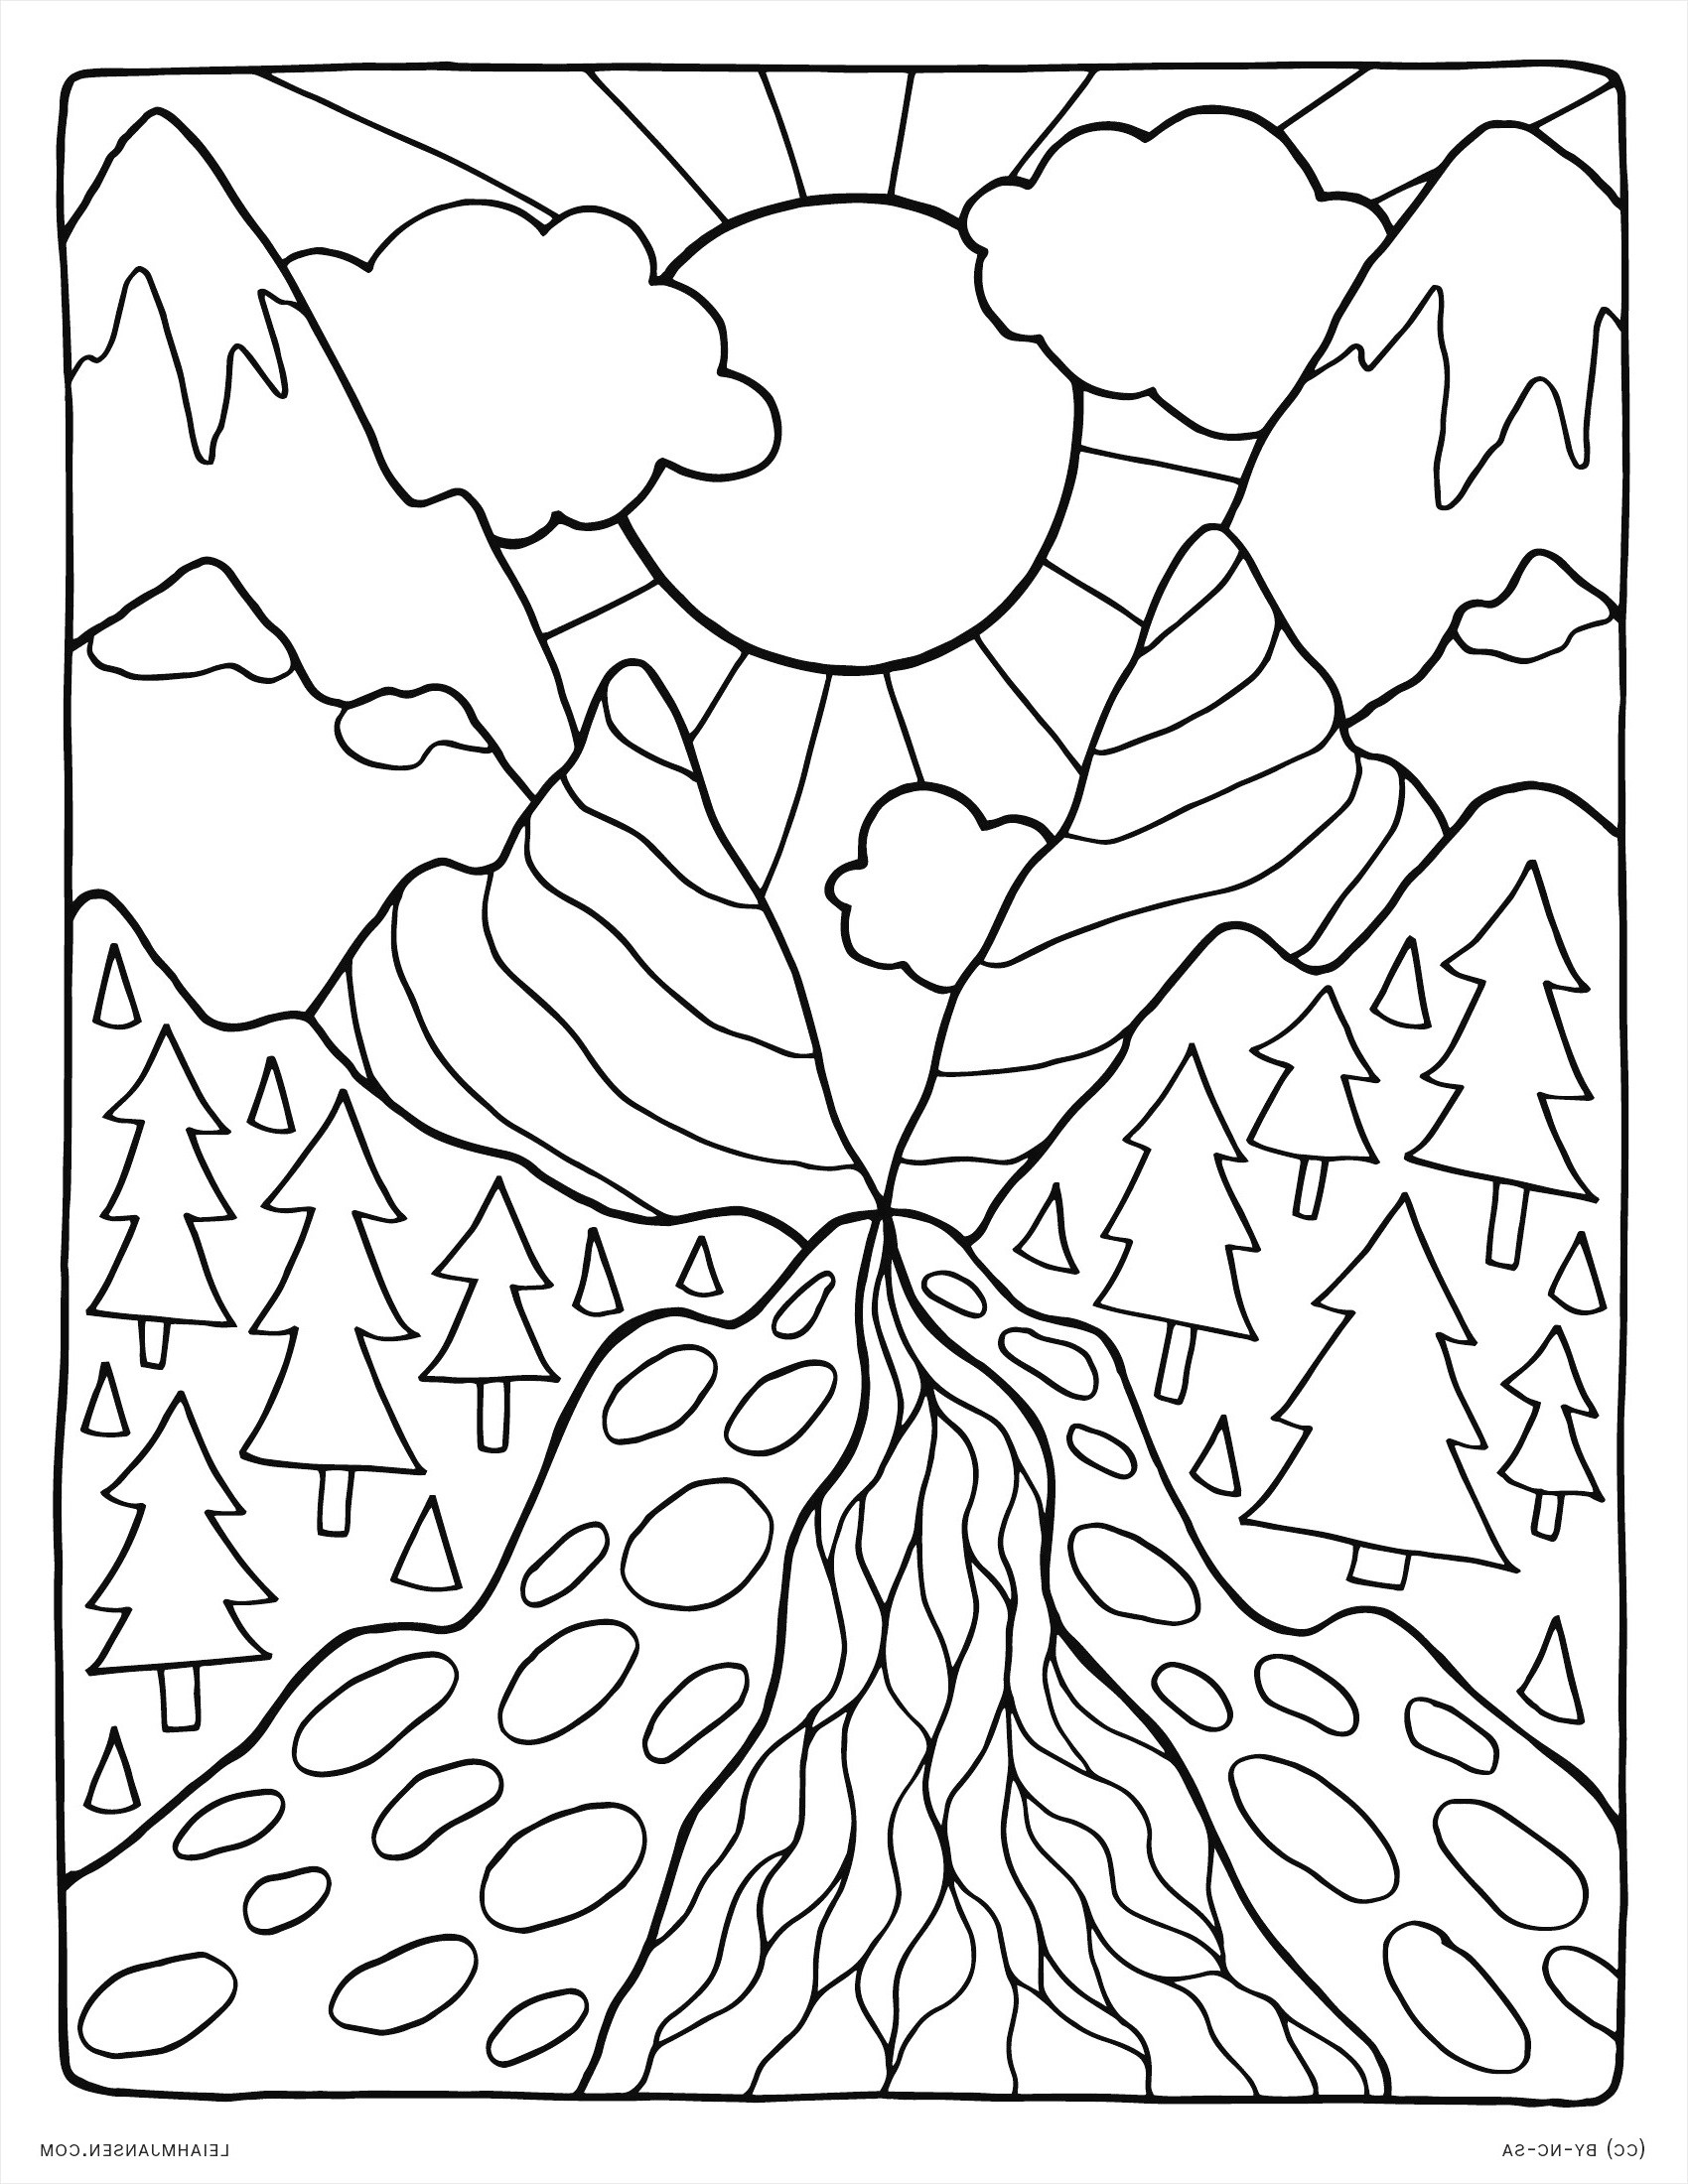 coloring pages : Color By Number Coloring Pages For Adults Awesome 21  Unique Graphy Adult Coloring Book Picture Color by Number Coloring Pages  for Adults ~ affiliateprogrambook.com